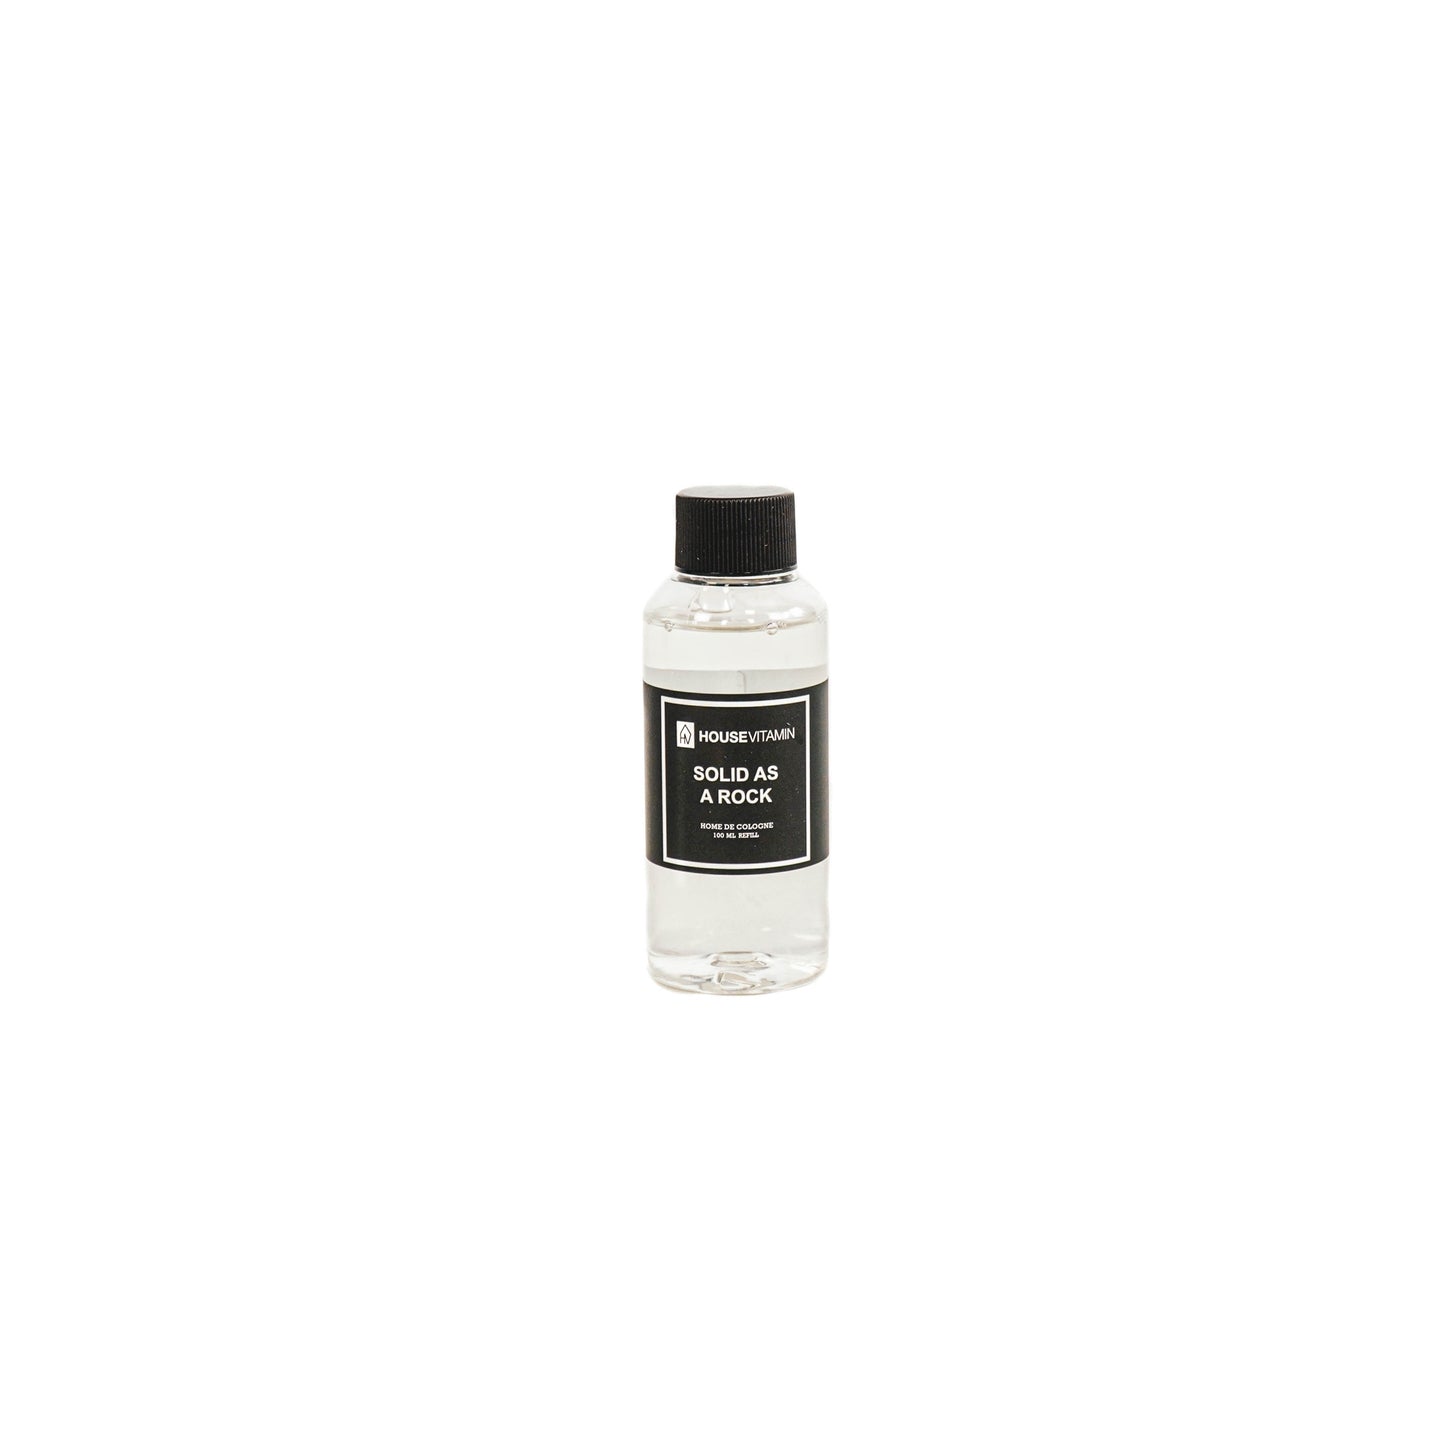 HV  Home de Cologne - Refill Reed diffuser - Solid as a Rock - 100 ml